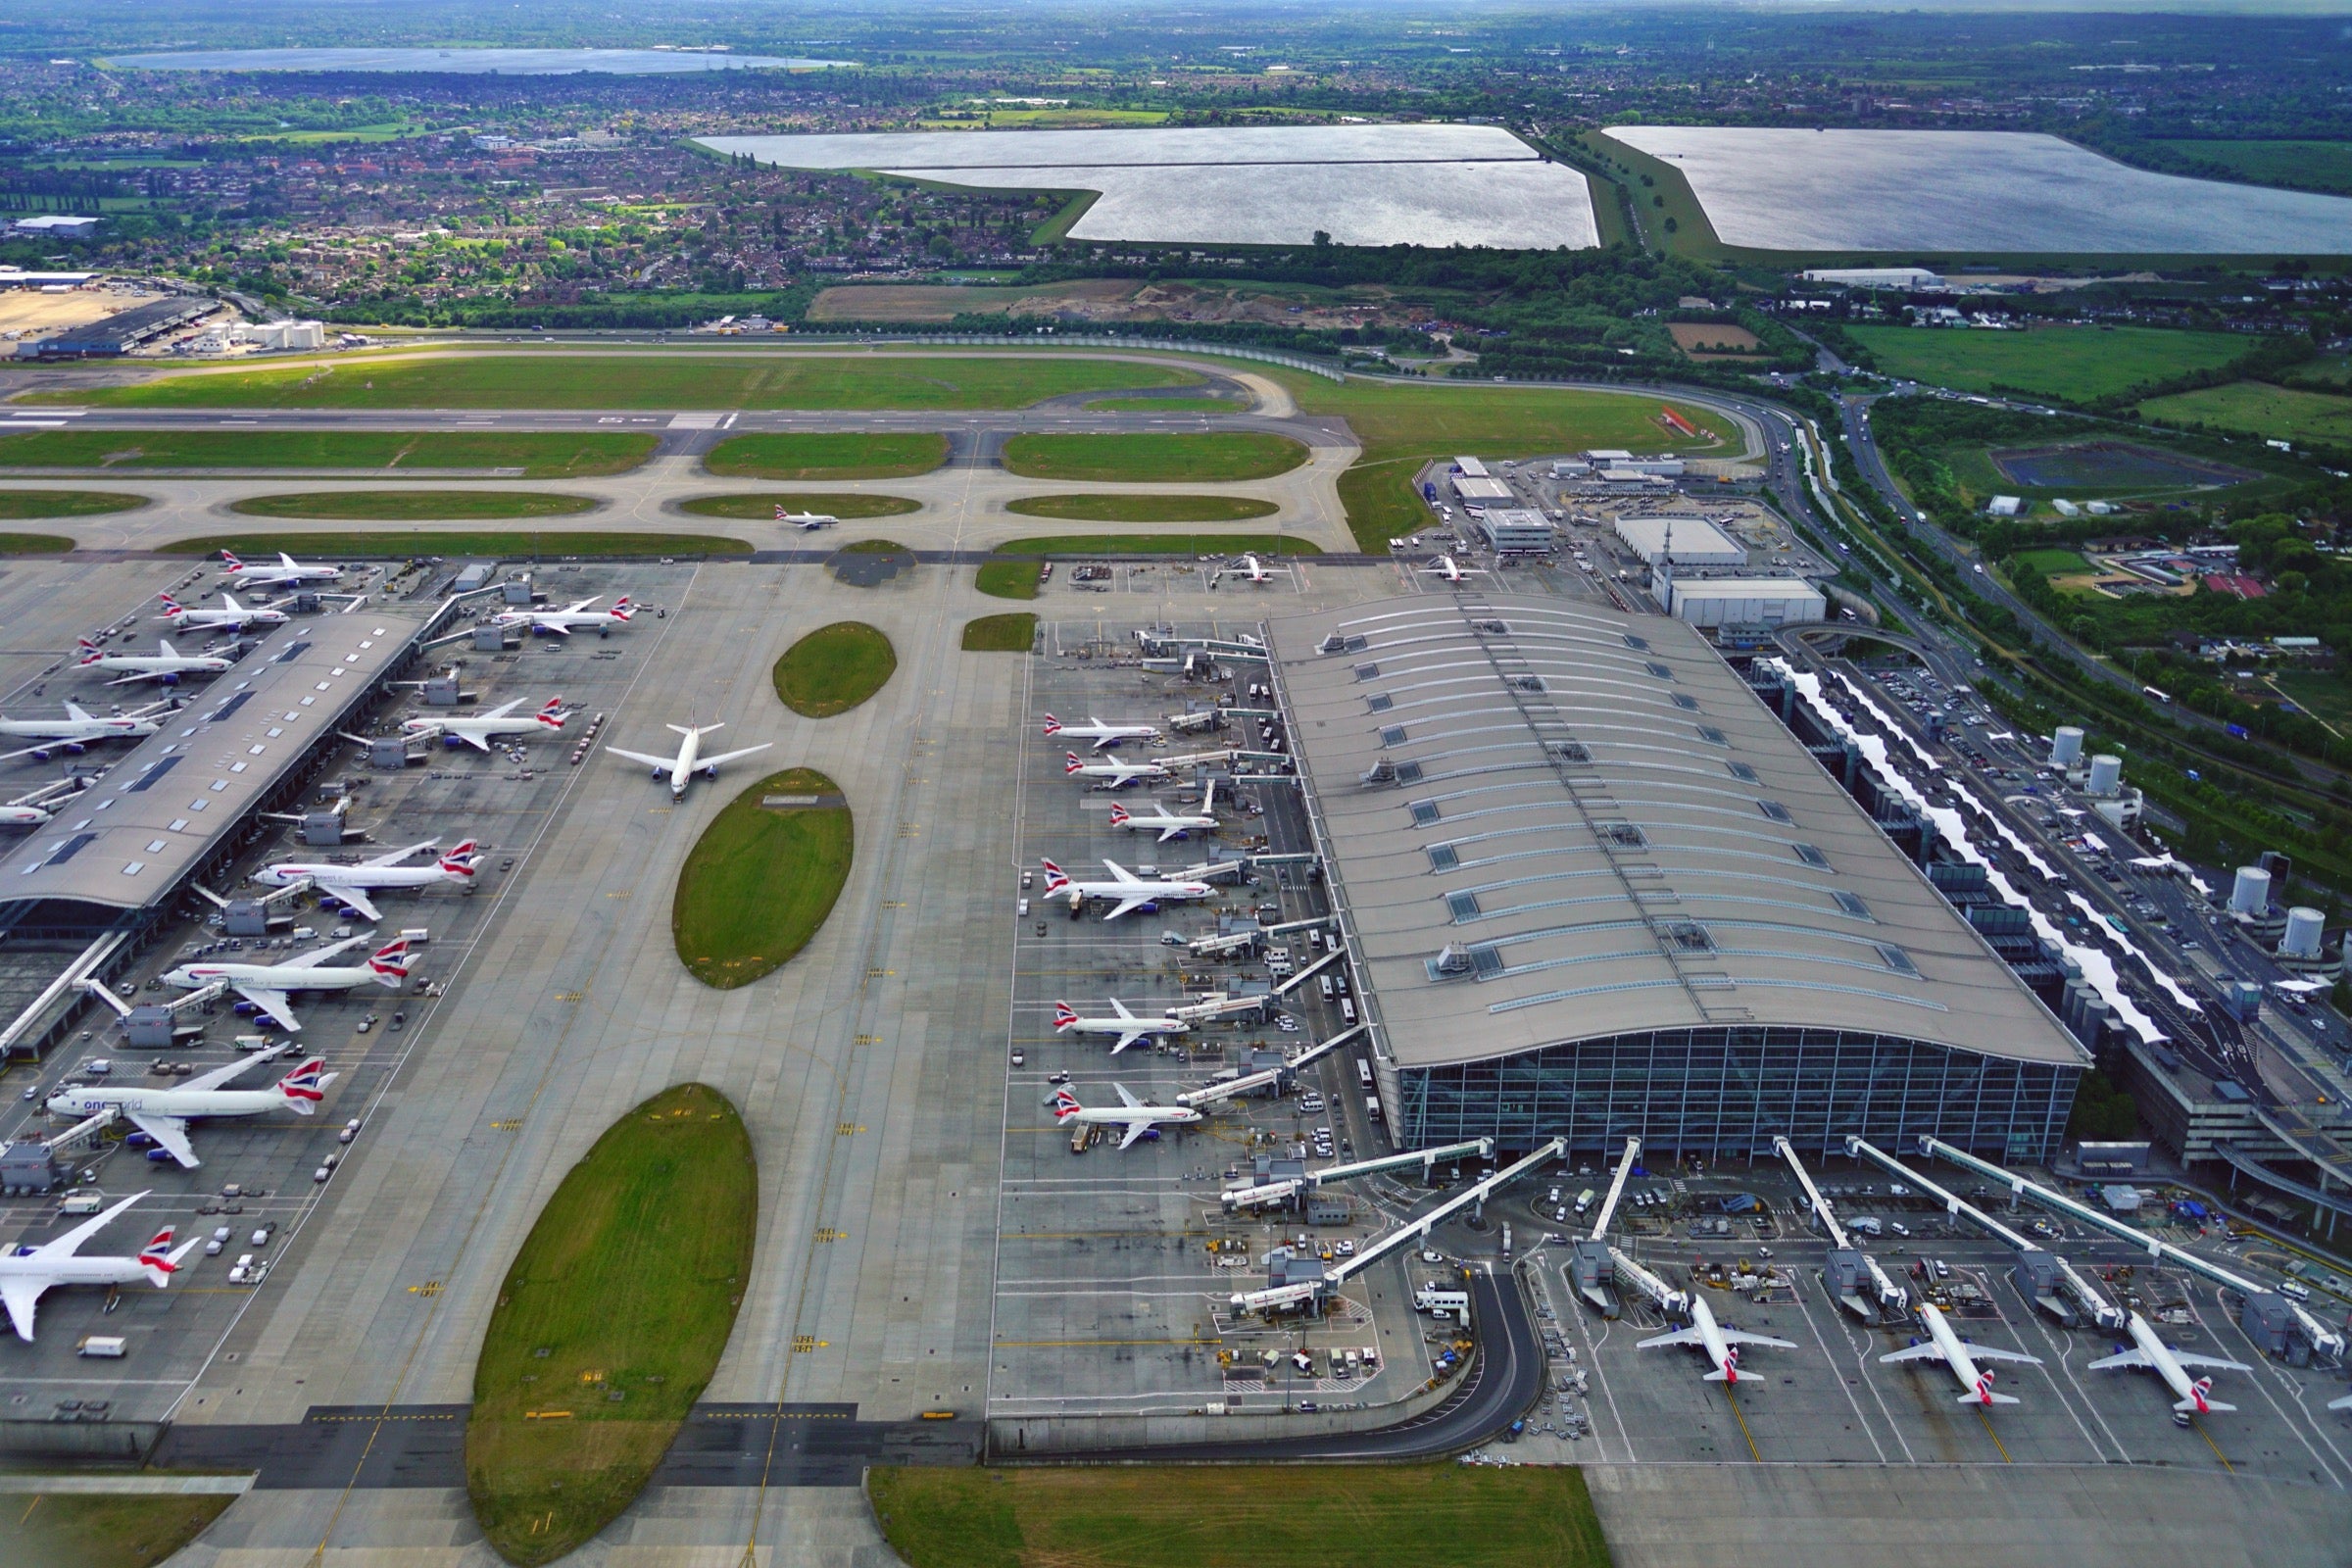 LHR Airport from above